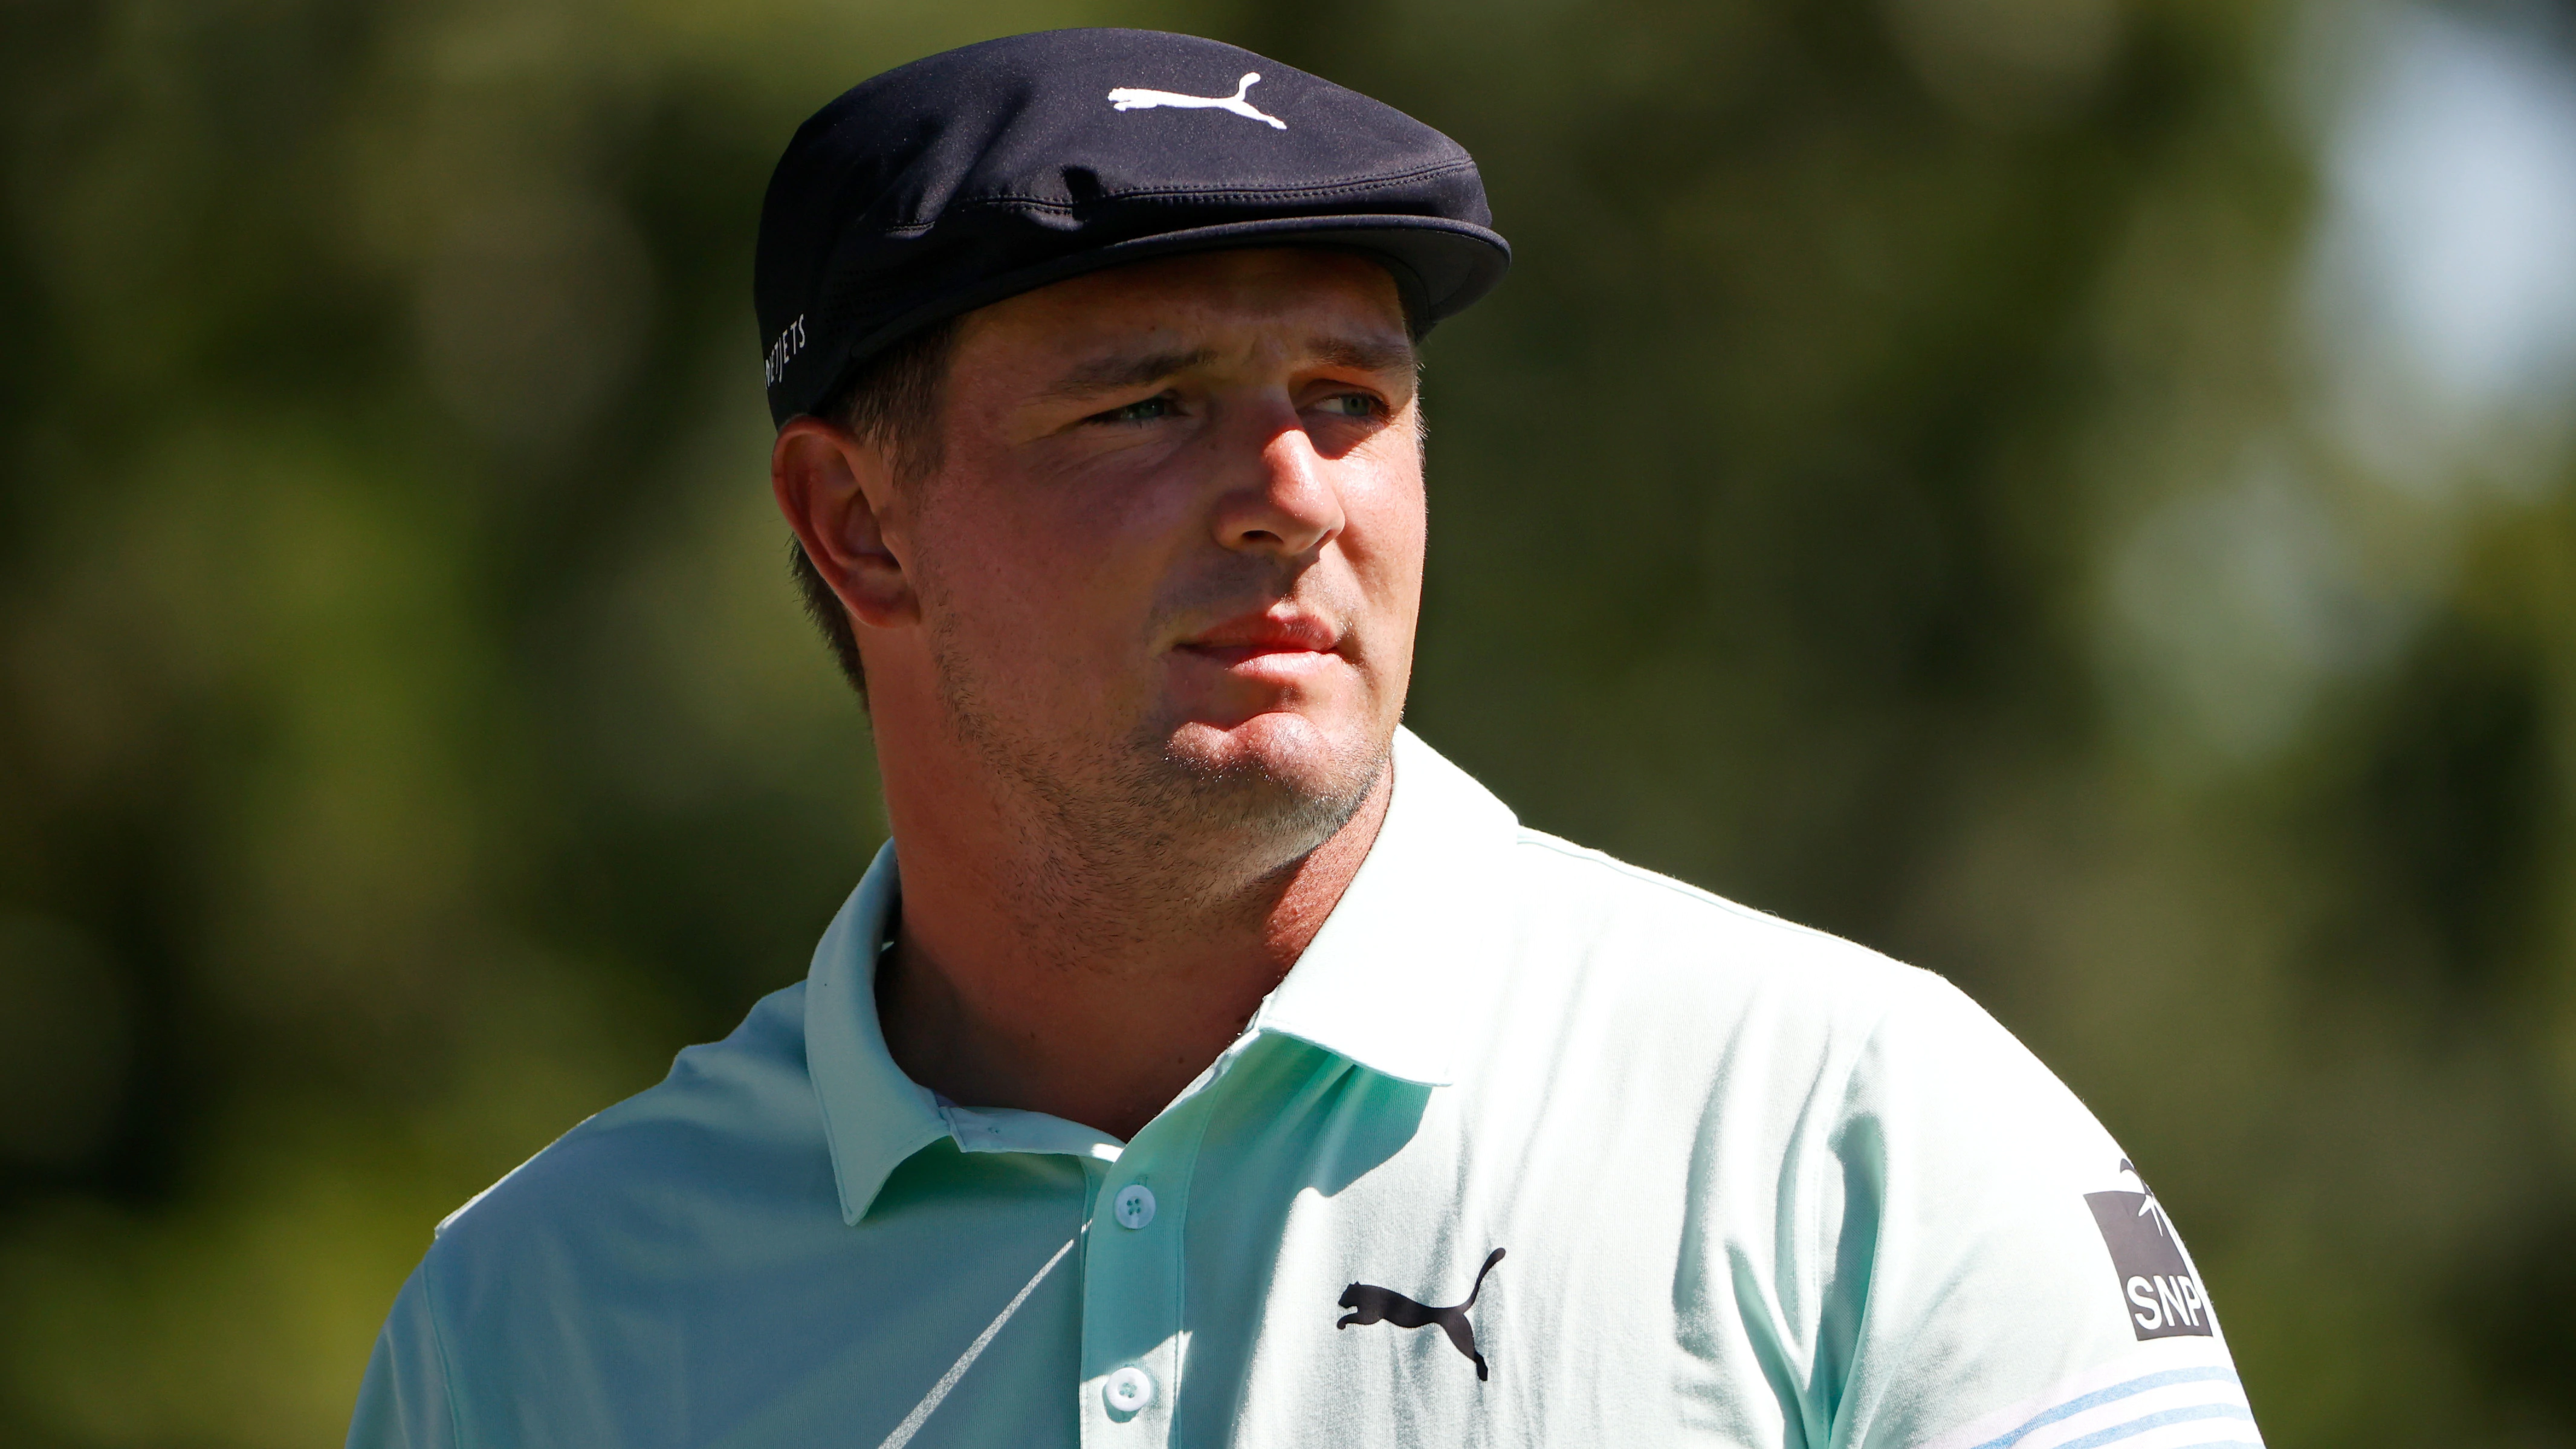 During quarantine, Bryson DeChambeau added another 20 pounds in the gym